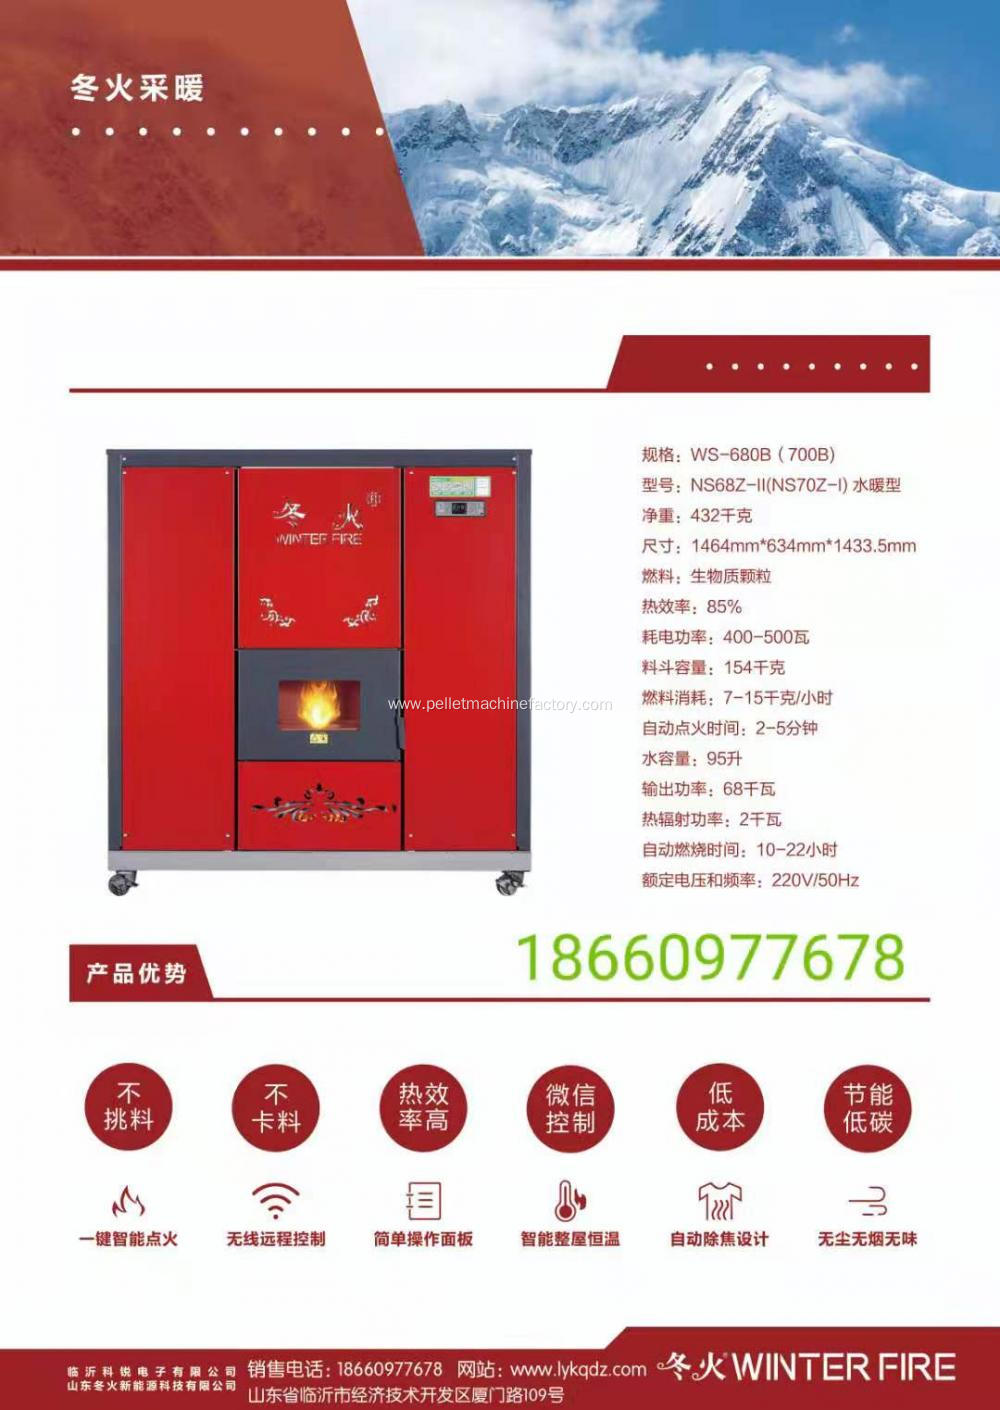 Excellent Quality Domestic Wood Pellet Fired Hot Water Furnace